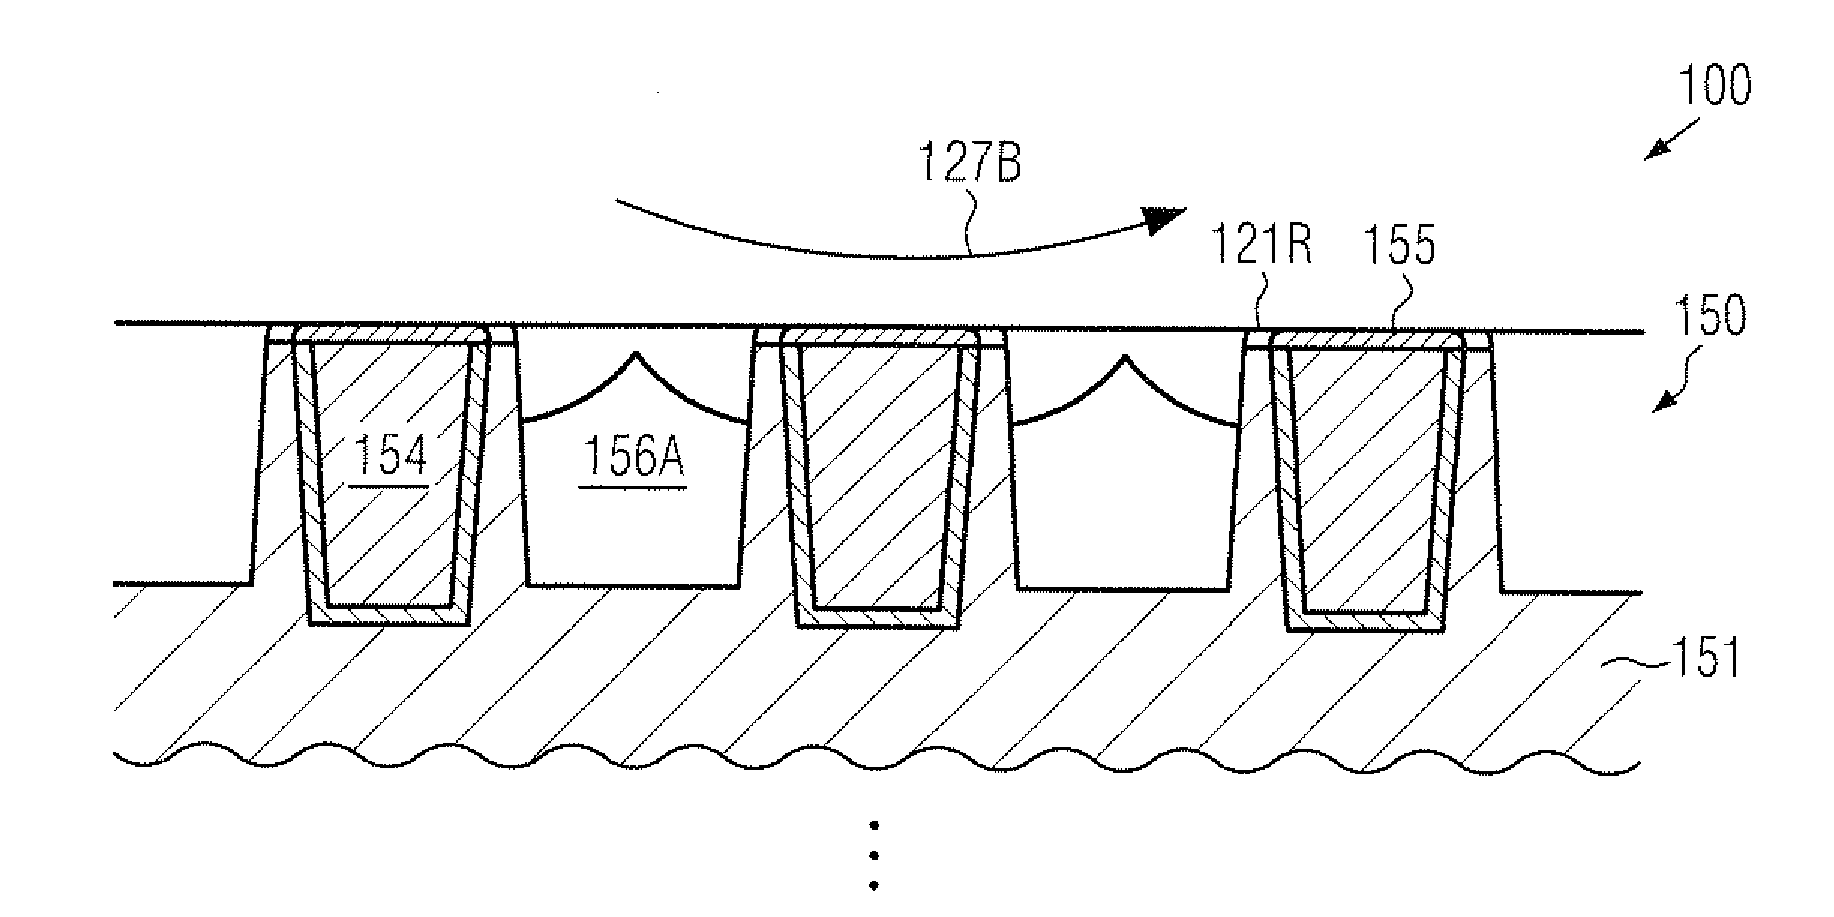 Microstructure device including a metallization structure with self-aligned air gaps between closely spaced metal lines